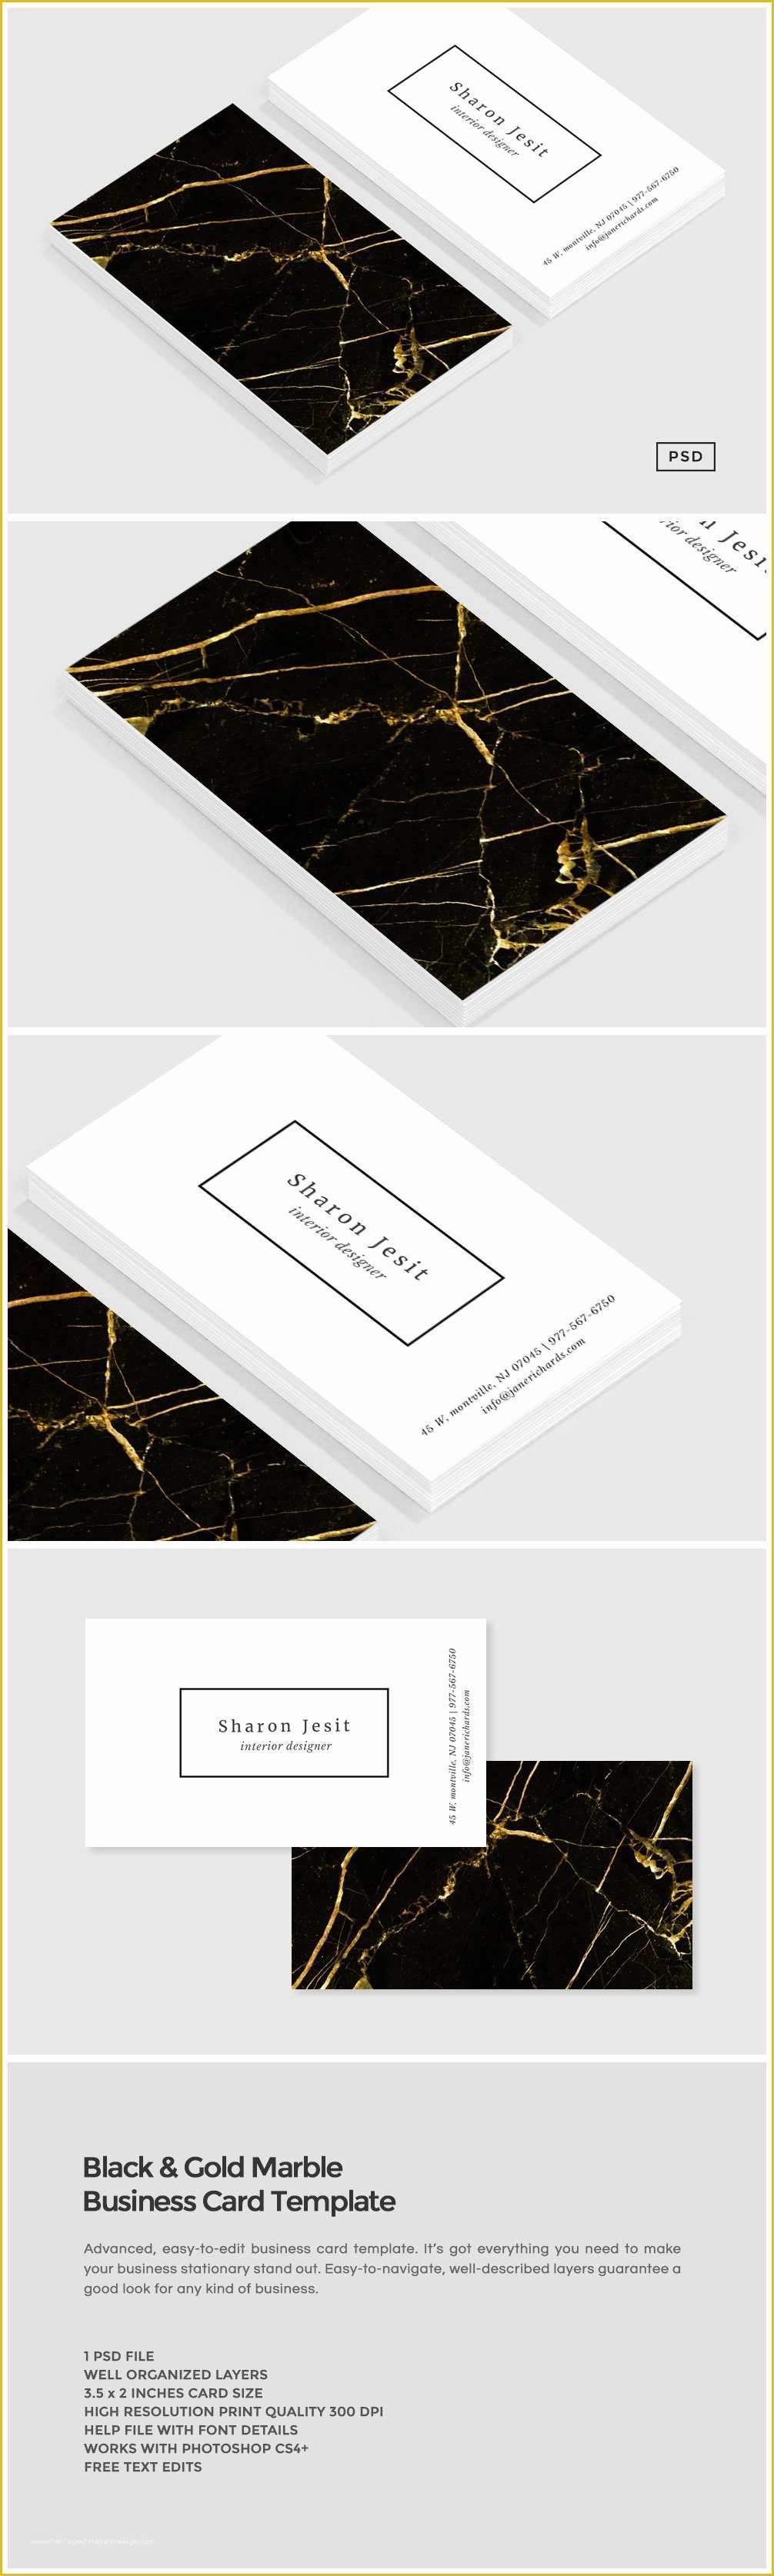 Gold Business Card Template Free Of Black & Gold Marble Business Card Business Card